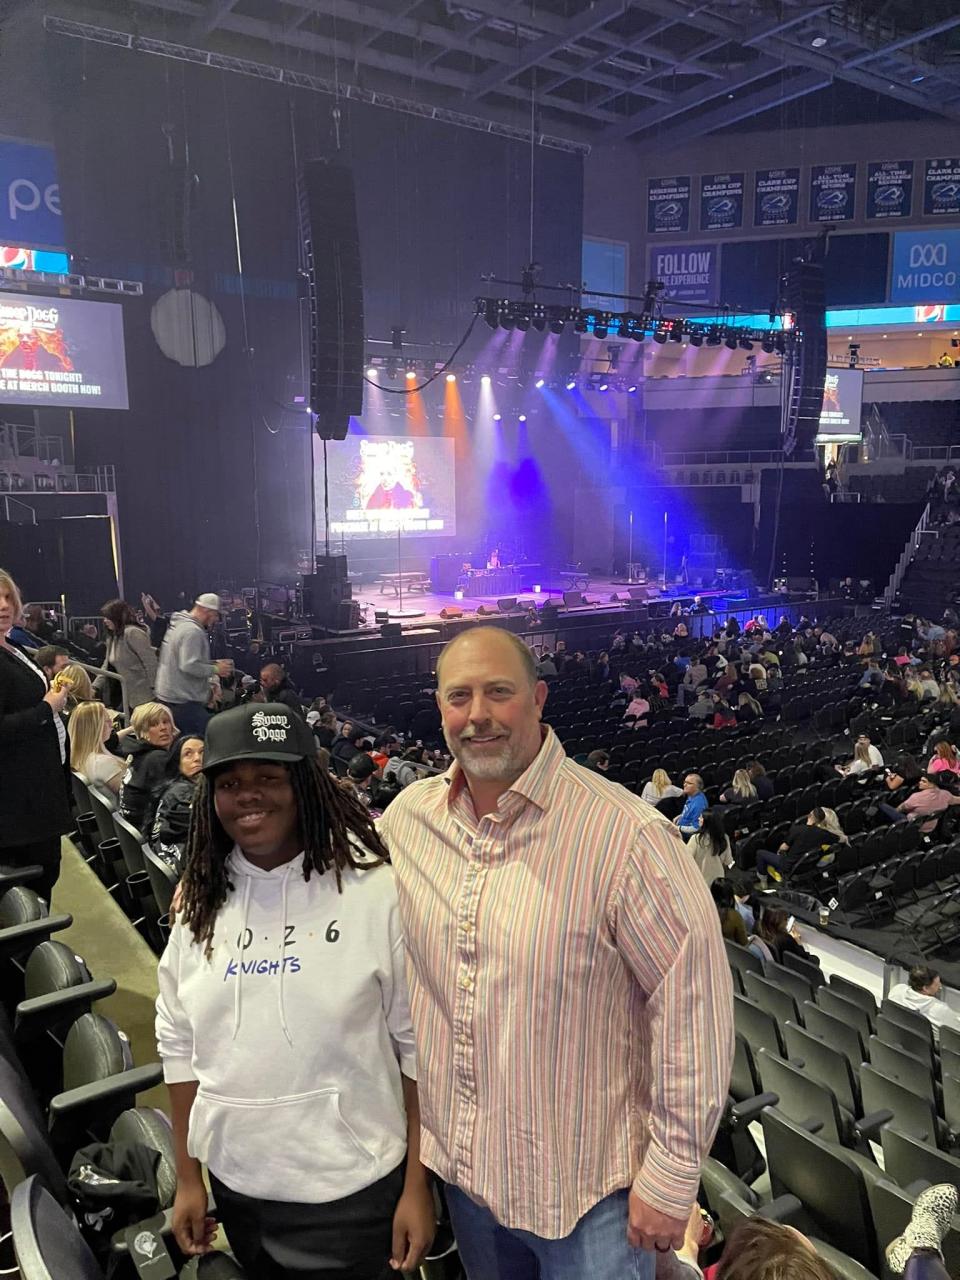 Braxton Schafer and his father Derrick Schafer attend the Snoop Dogg concert at the PREMIER Center on April 19, 2022. Braxton wore a Snoop Dogg hat and an O'Gorman Class of 2026 sweatshirt to the event.